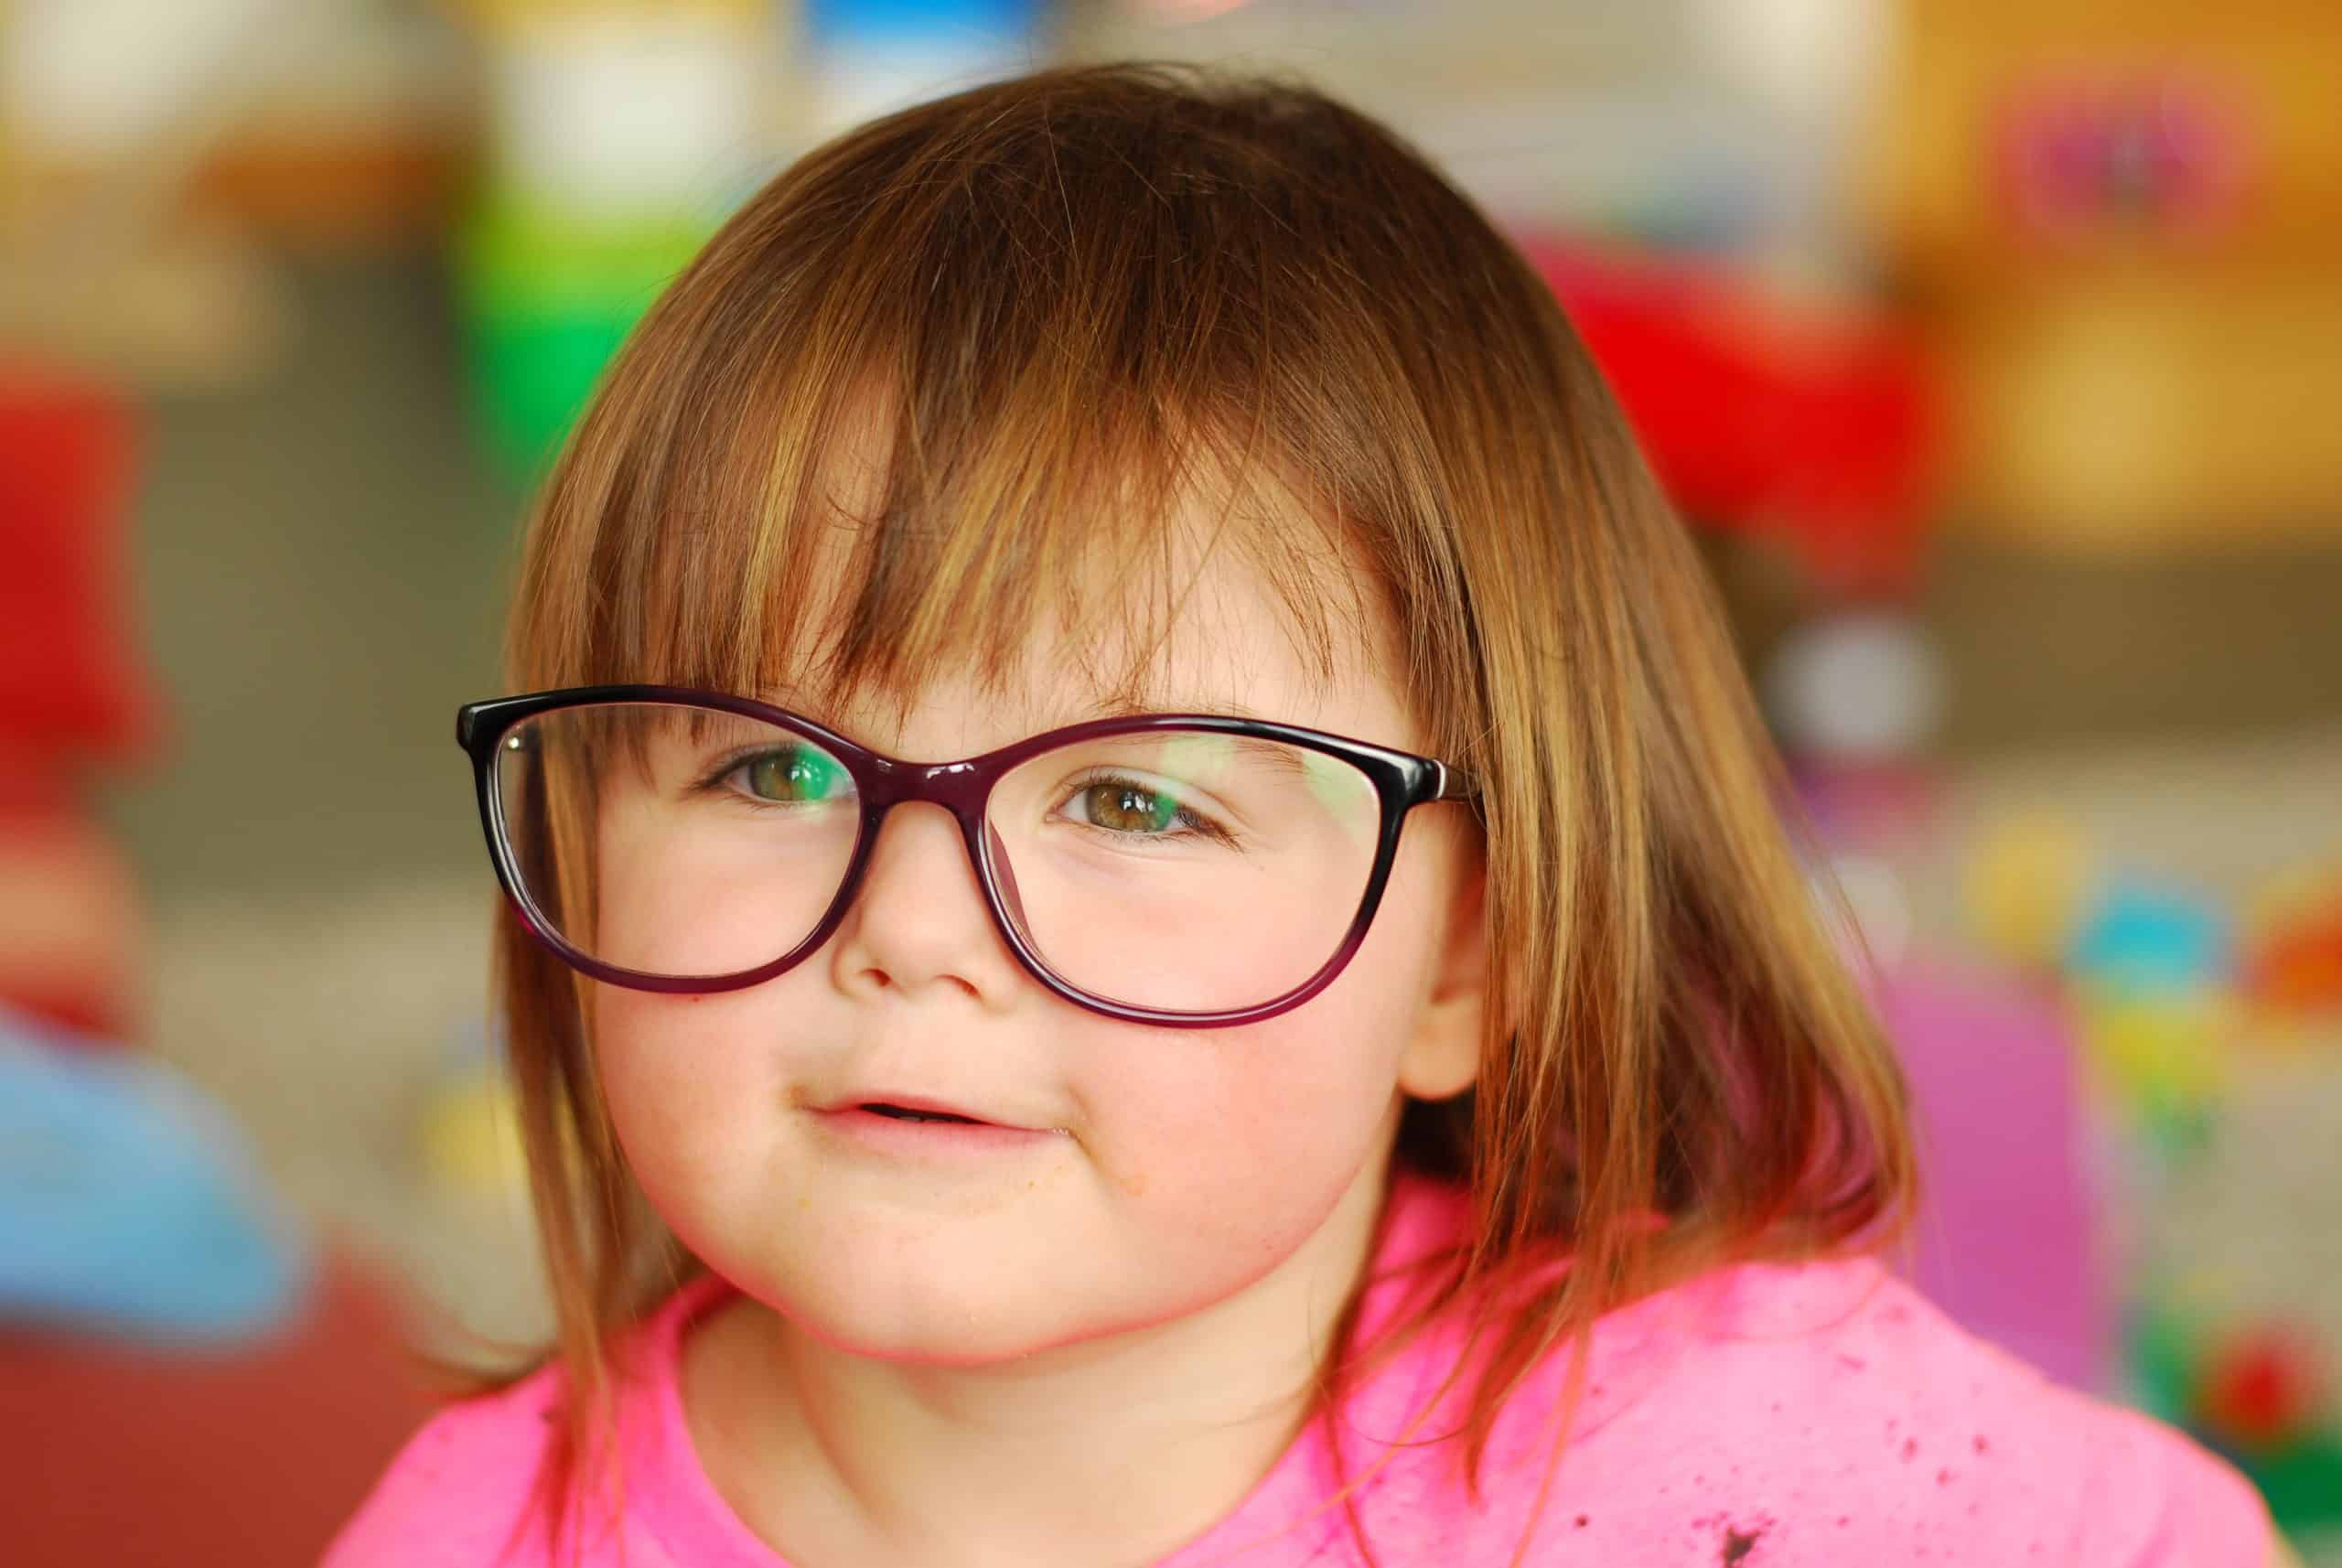 Image of girl in pink t-shirt wearing over-sized glasses